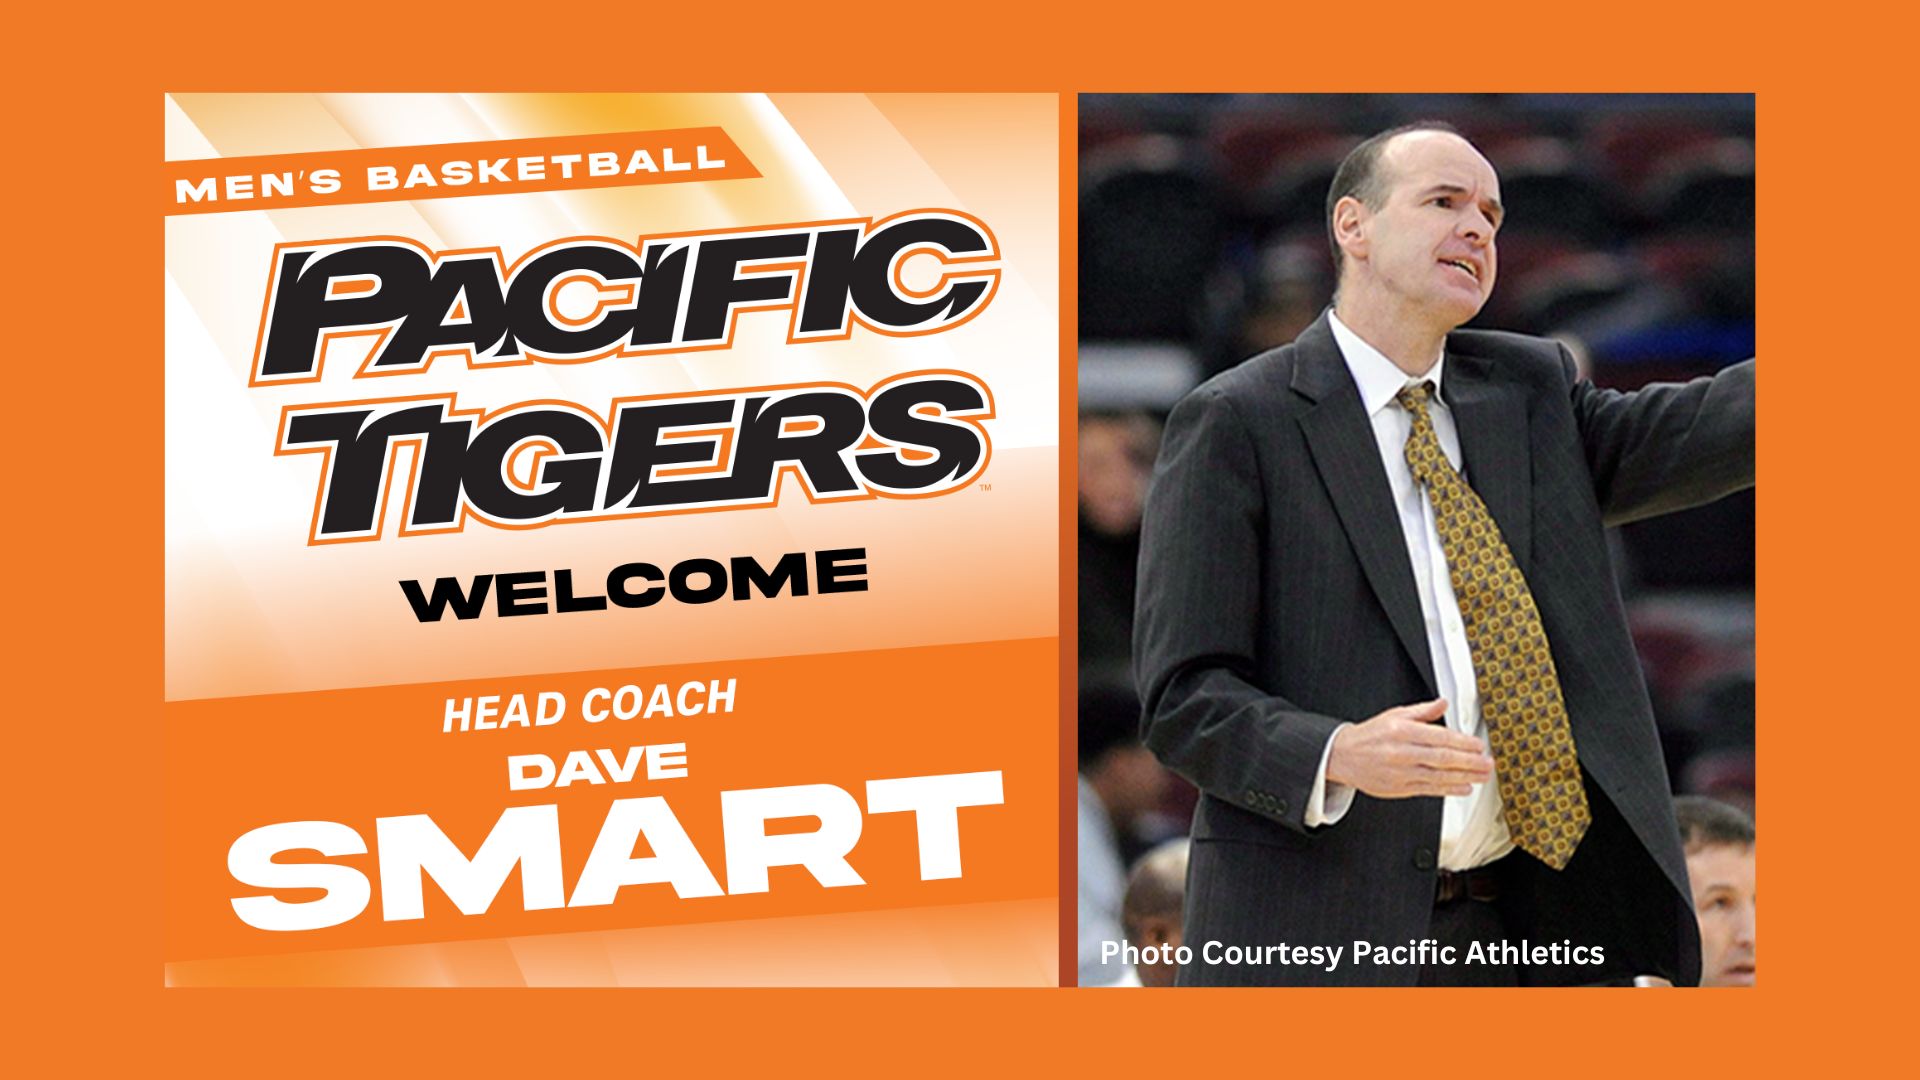 Dave Smart Named Head Basketball Coach at Pacific: A Phenomenal Canadian Coaching Talent